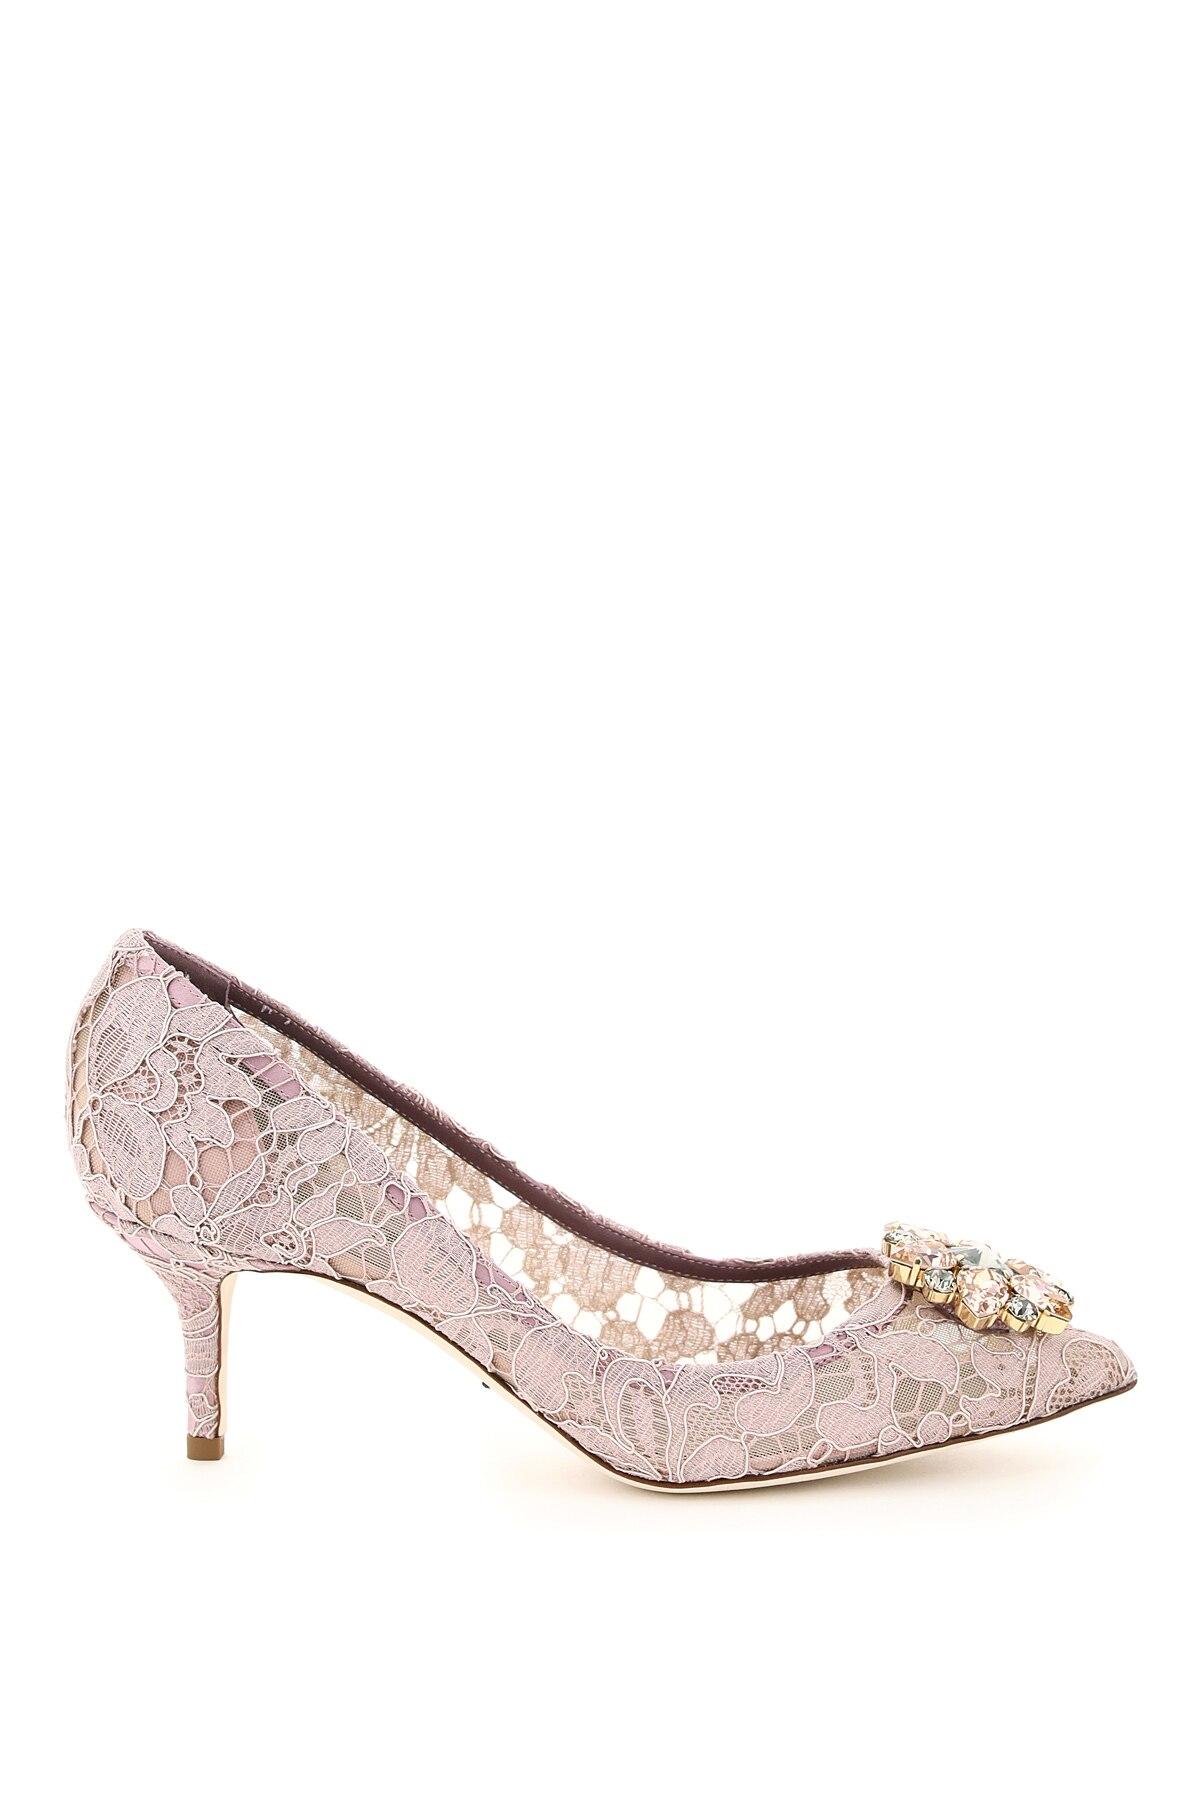 Dolce & Gabbana Charmant Lace Bellucci Pumps in Pink,Purple (Pink 